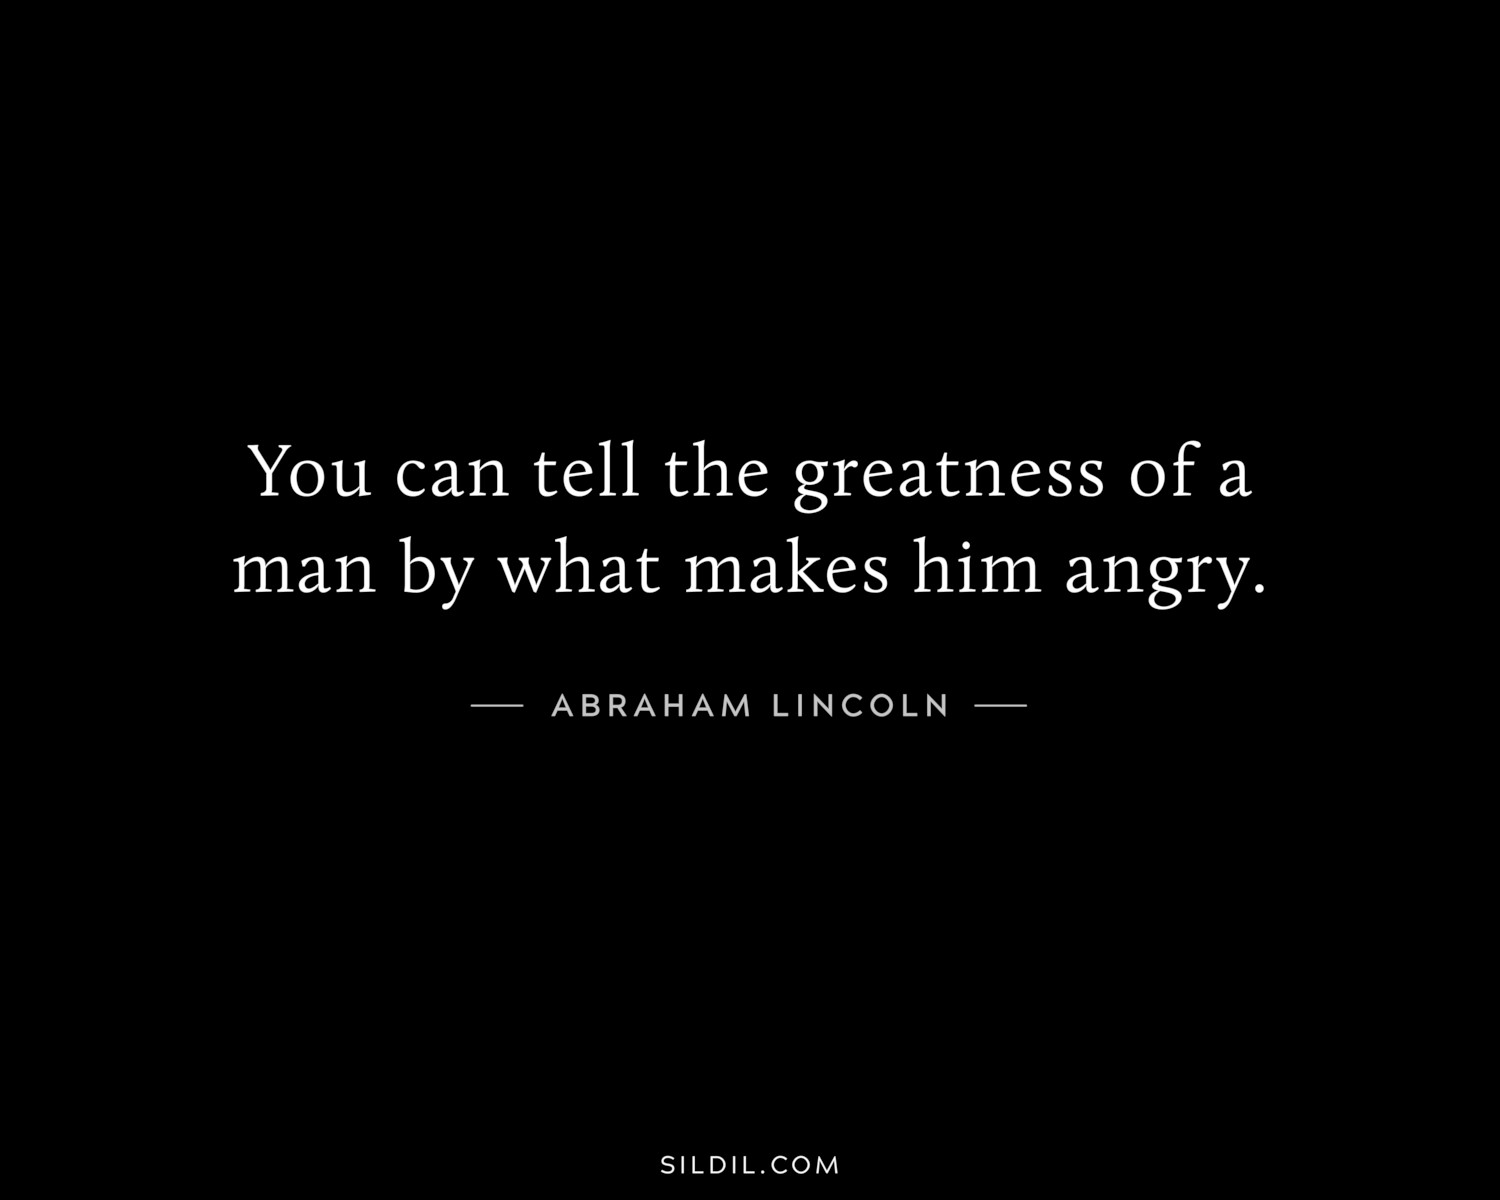 You can tell the greatness of a man by what makes him angry.